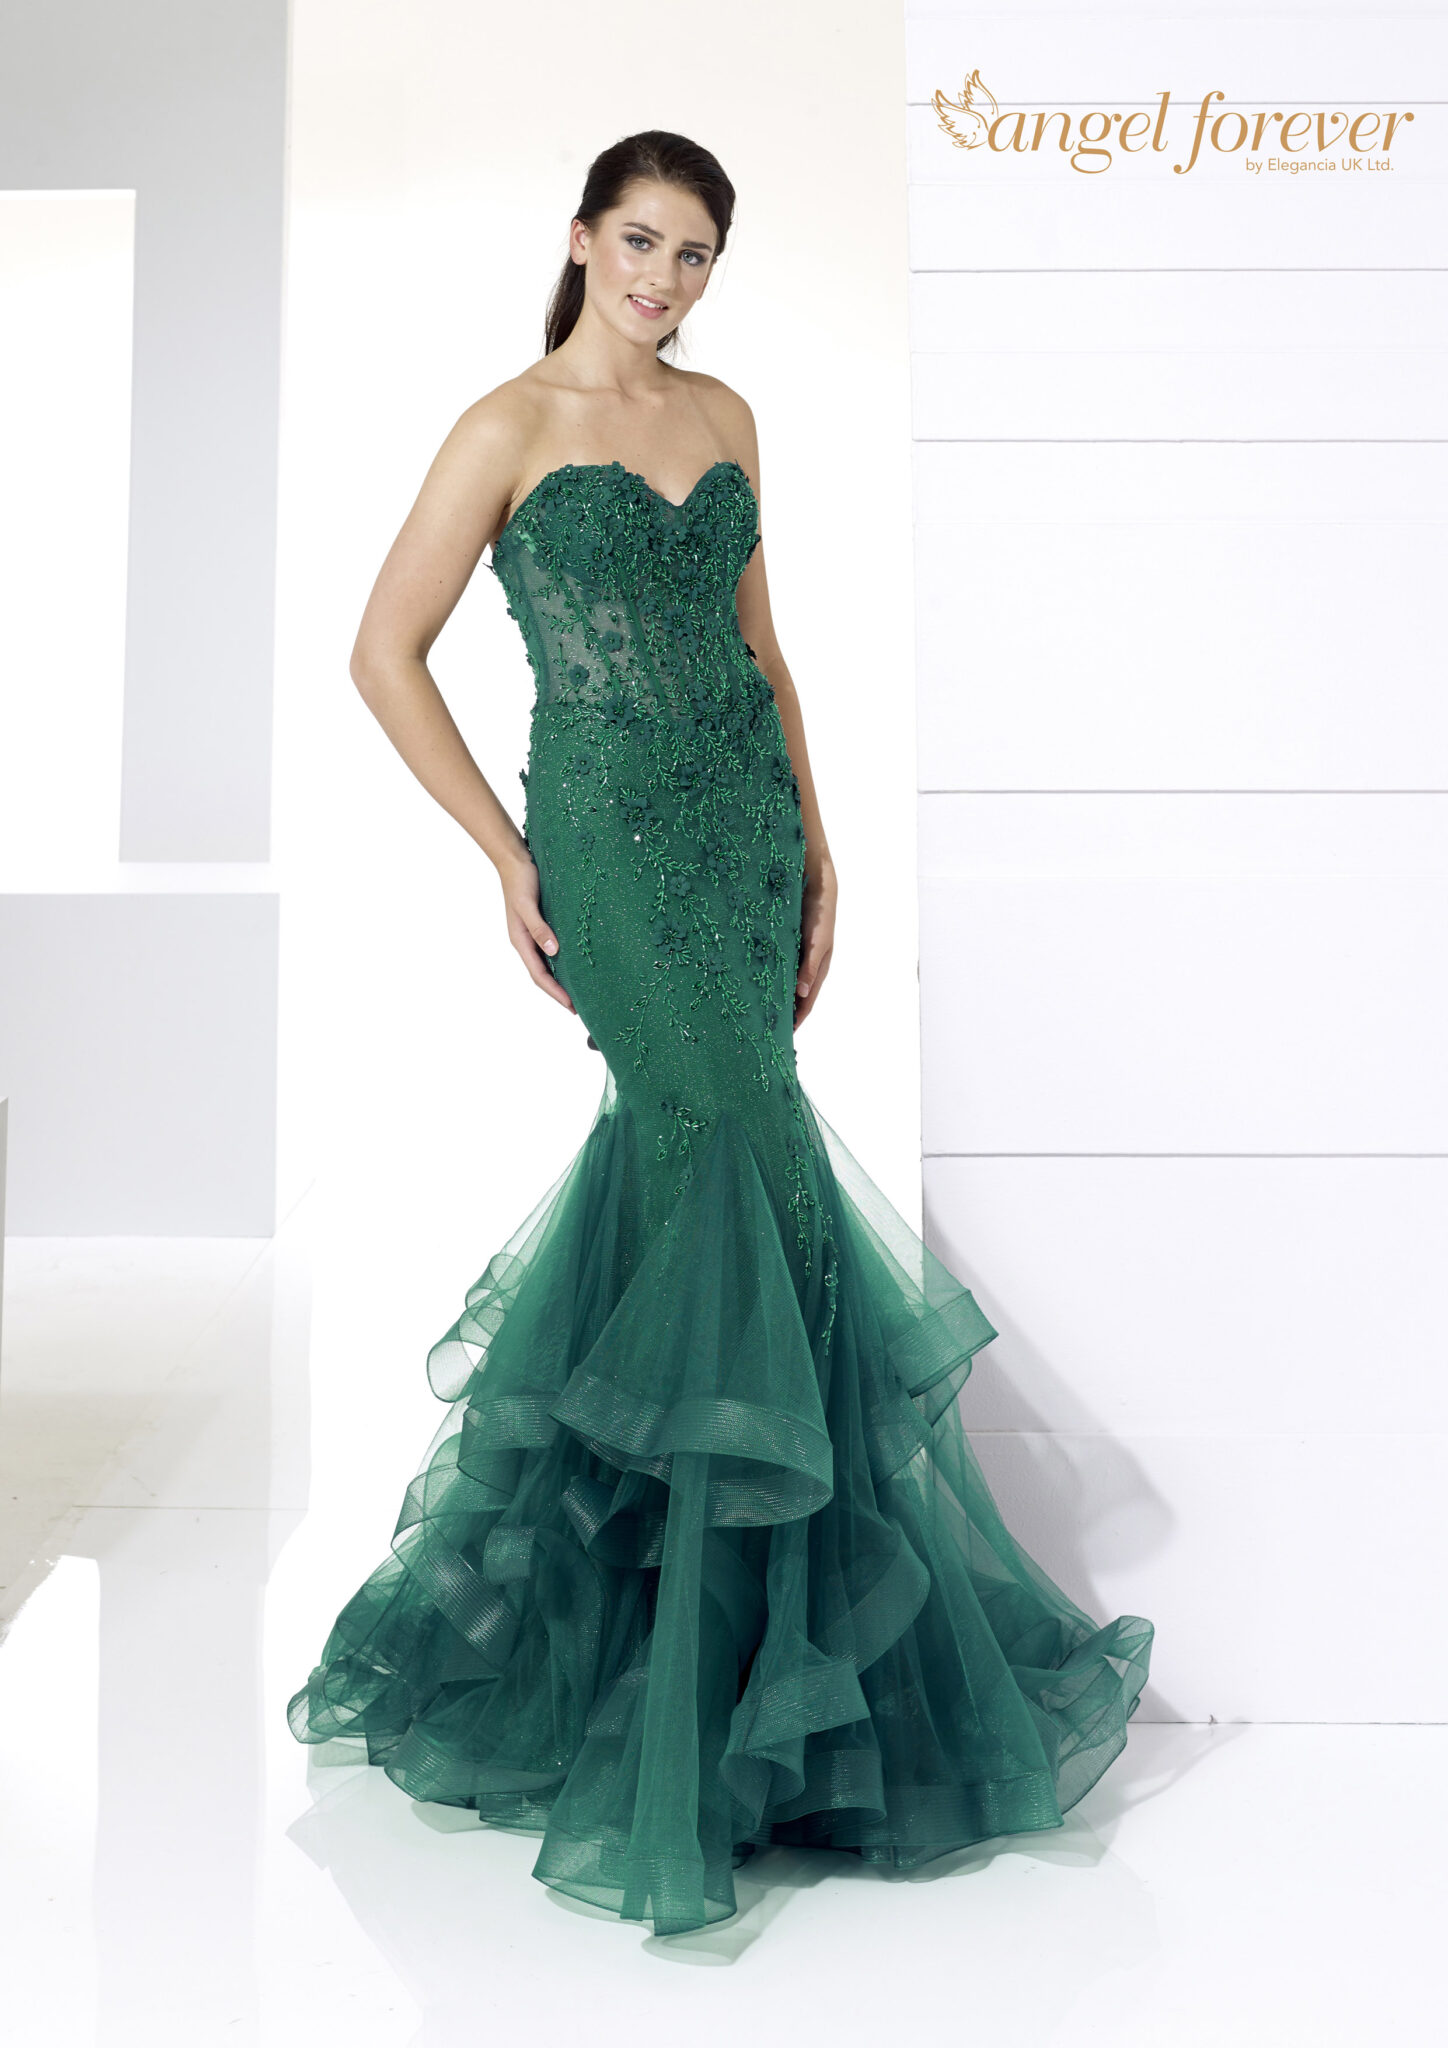 Off Shoulder Emerald Green Satin A Line Forest Green Prom Dress With Bow  Fashionable Formal Gown For Evening Parties And Events From Cplv1, $66.58 |  DHgate.Com